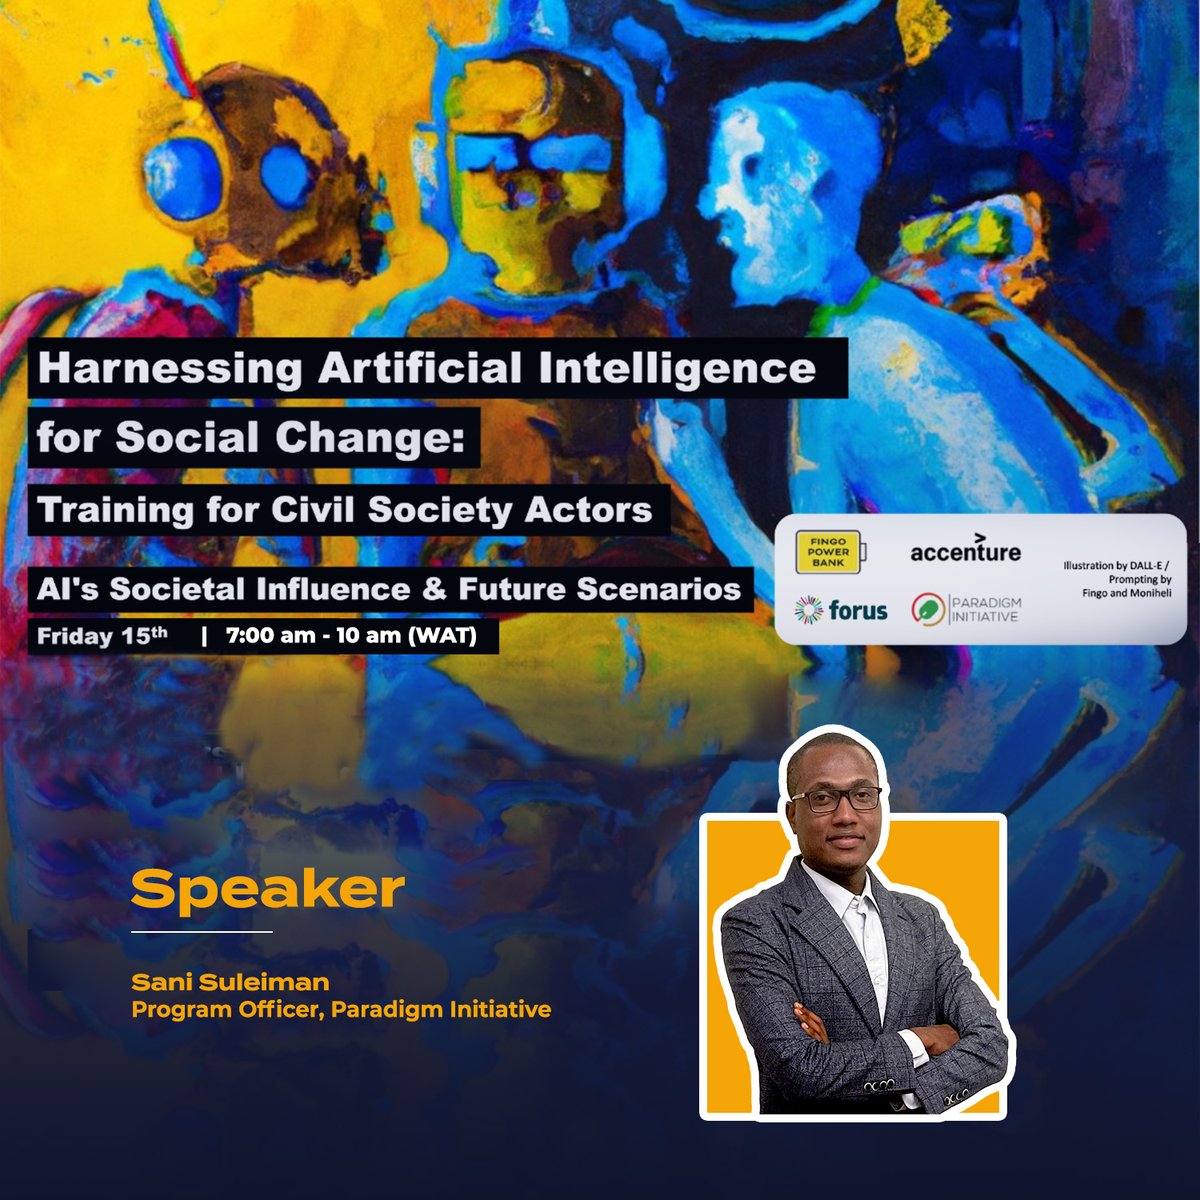 🌐🤖 In our fast-evolving tech world, Artificial Intelligence (AI) is a potential game-changer. Our Programs Officer, @SS_Suleimann, will speak at the Harnessing Artificial Intelligence for Social Change Workshop. Date: Friday 15th September📅 ⏰ 7:00-10:00am WAT